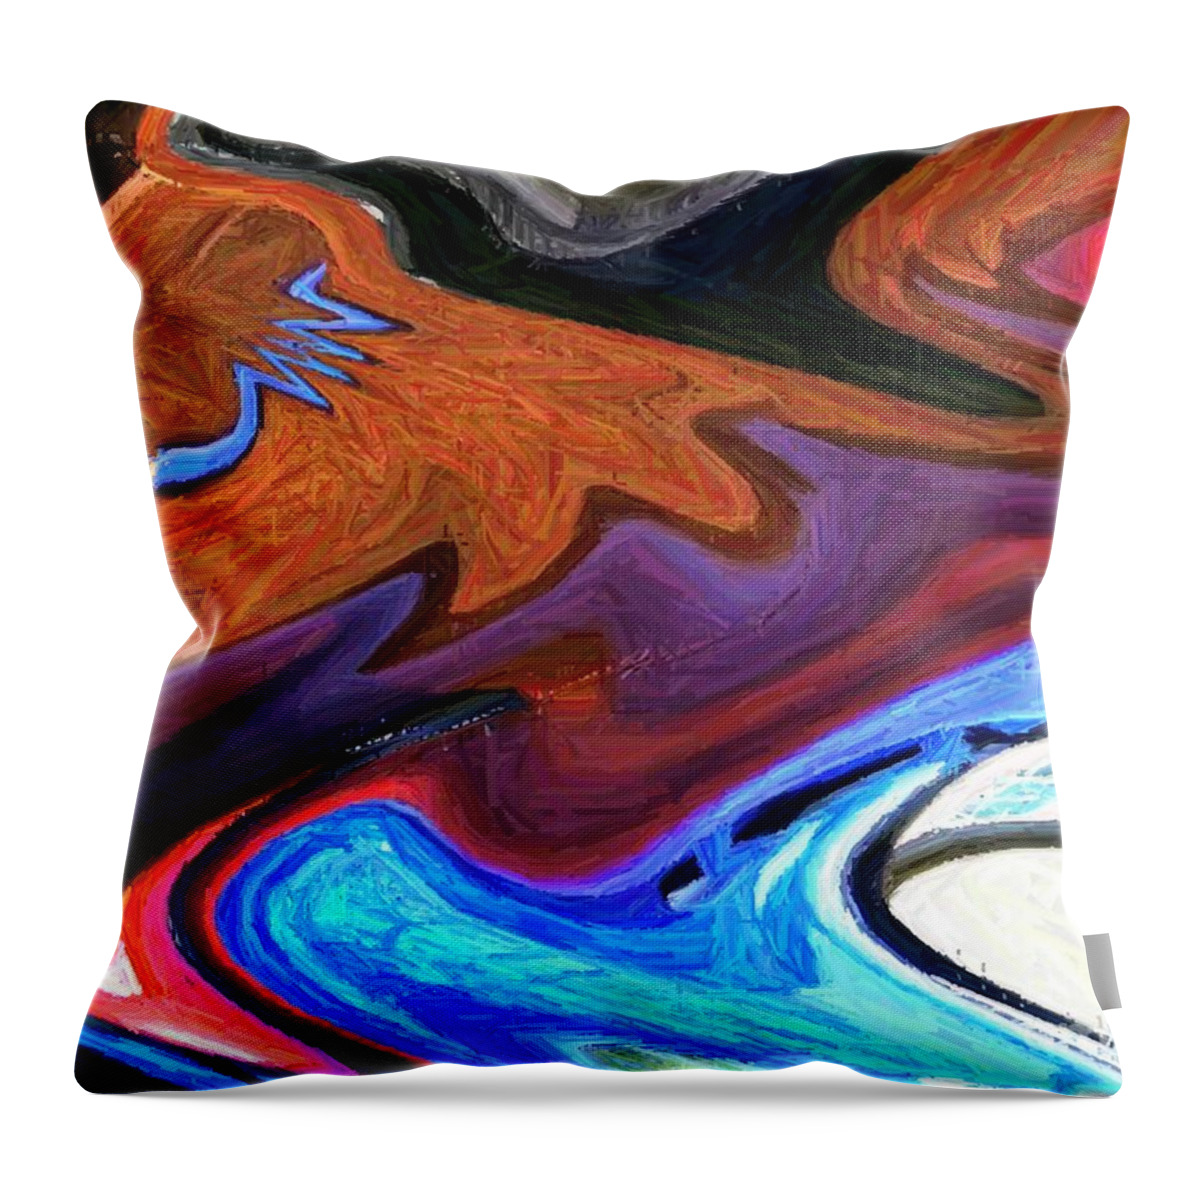 Mountain Throw Pillow featuring the painting Down From The Mountain by Bill King